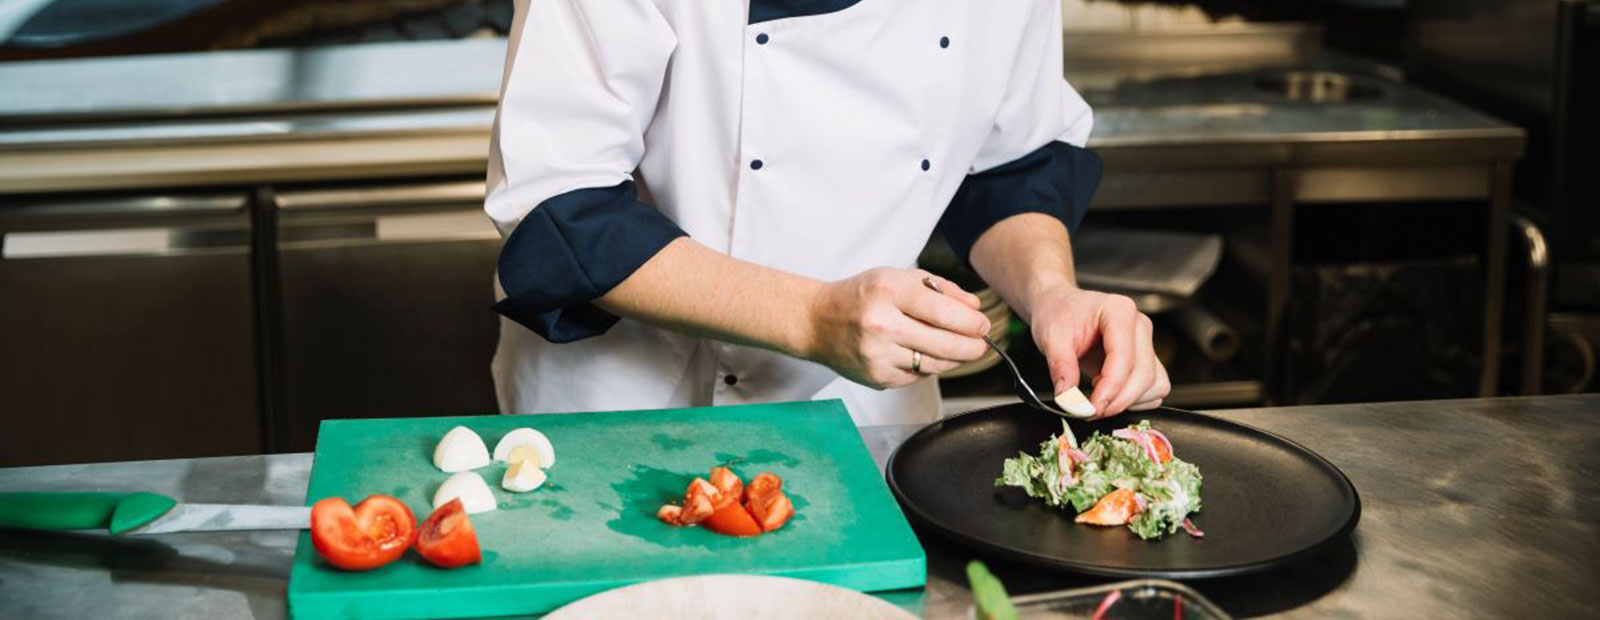 How to Join a Culinary Art School in Delhi: A Step-By-Step Guide